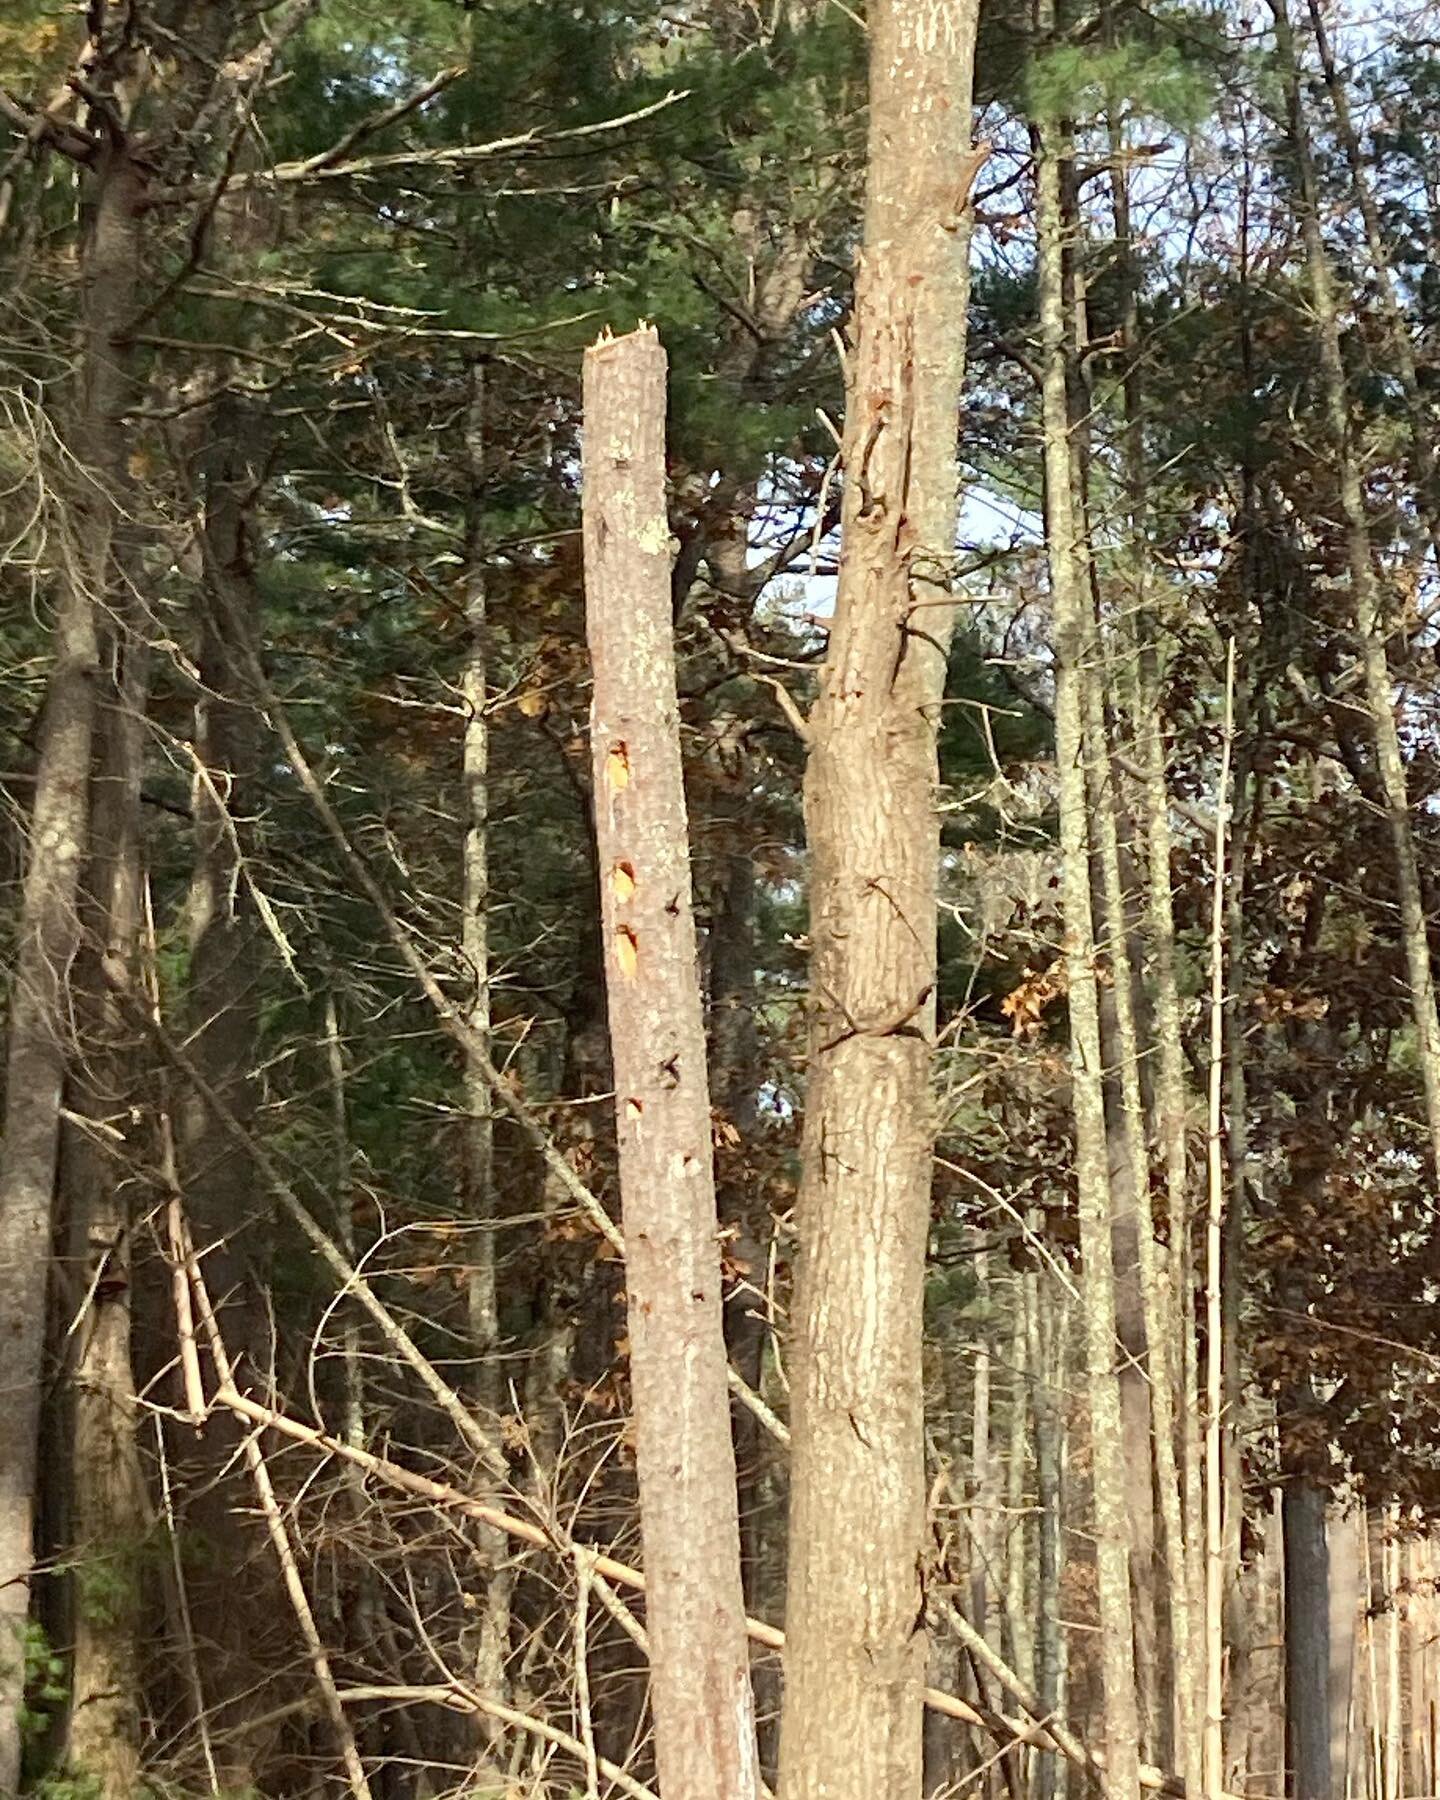 Sharing outside spaces: I&rsquo;ve been taking down hazard trees threatening a family&rsquo;s house. One was a white pine (left) whose trunk was quite compromised, but obviously loved by local pileated woodpeckers. The solution- in consultation with 